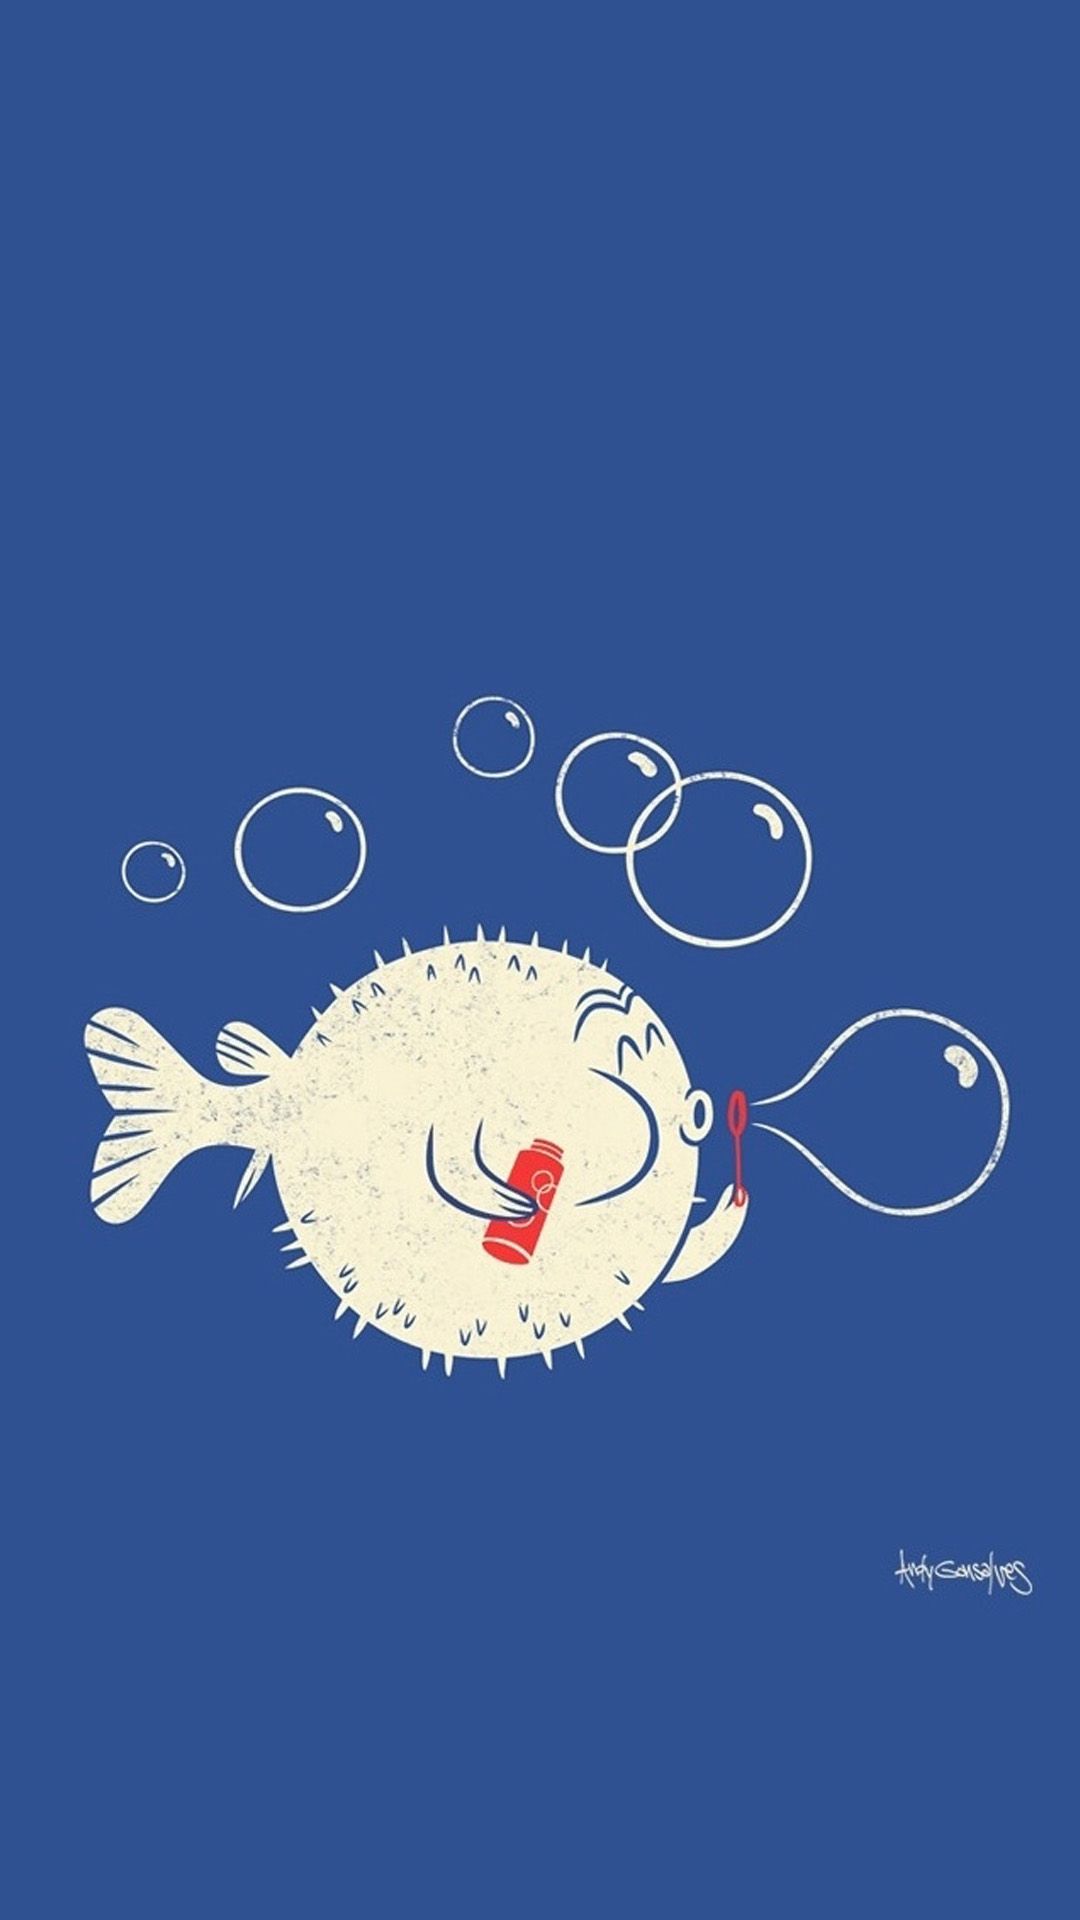 Fish Bubbles to see more #Cute and #Funny #Cartoon #Wallpaper - Cartoon wallpaper, Funny wallpaper, Phone wallpaper